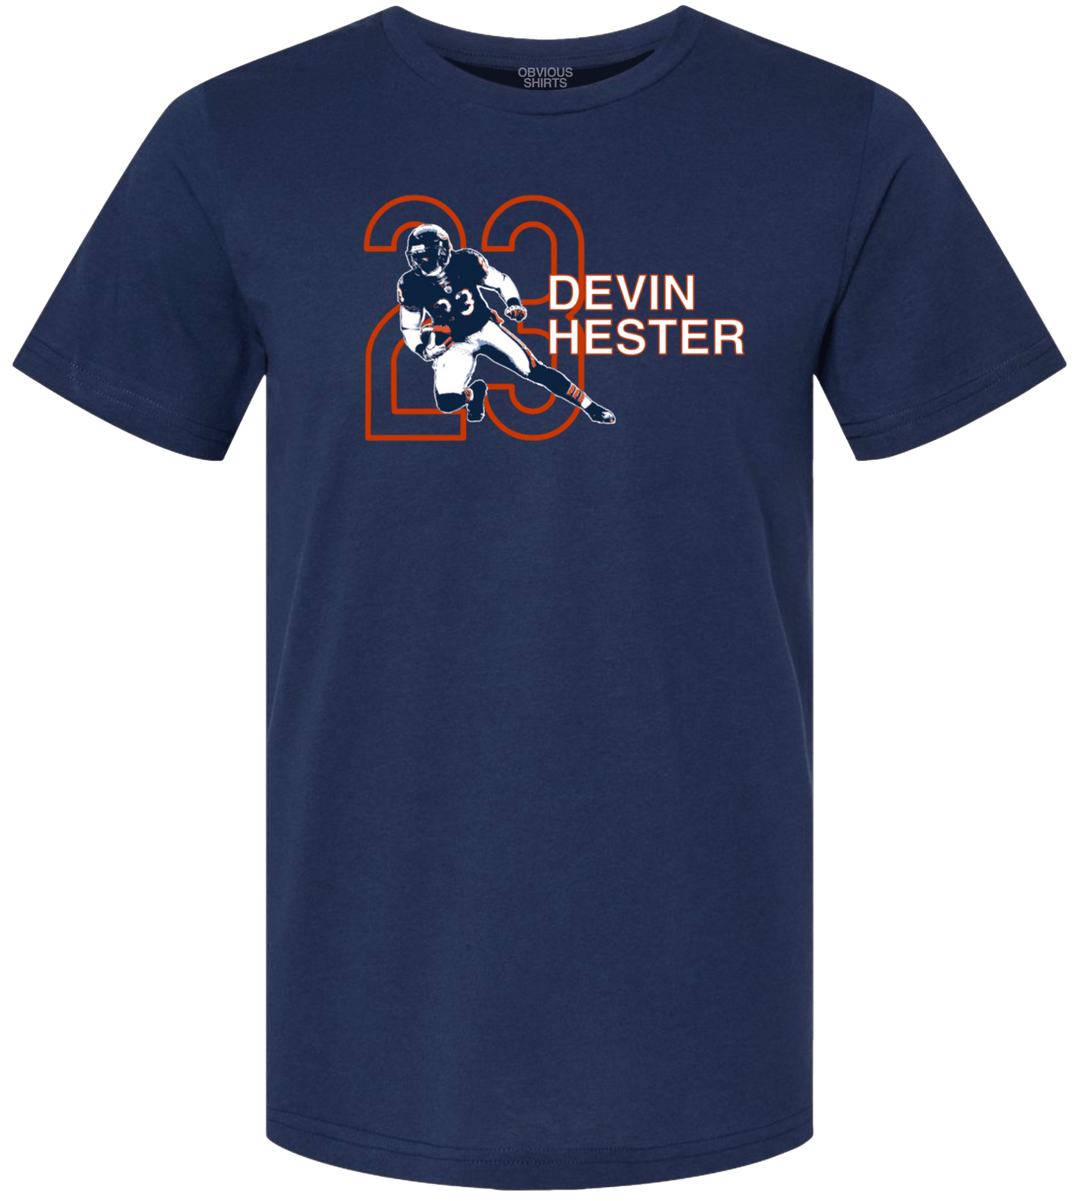 DEVIN HESTER GRAPHIC. - OBVIOUS SHIRTS